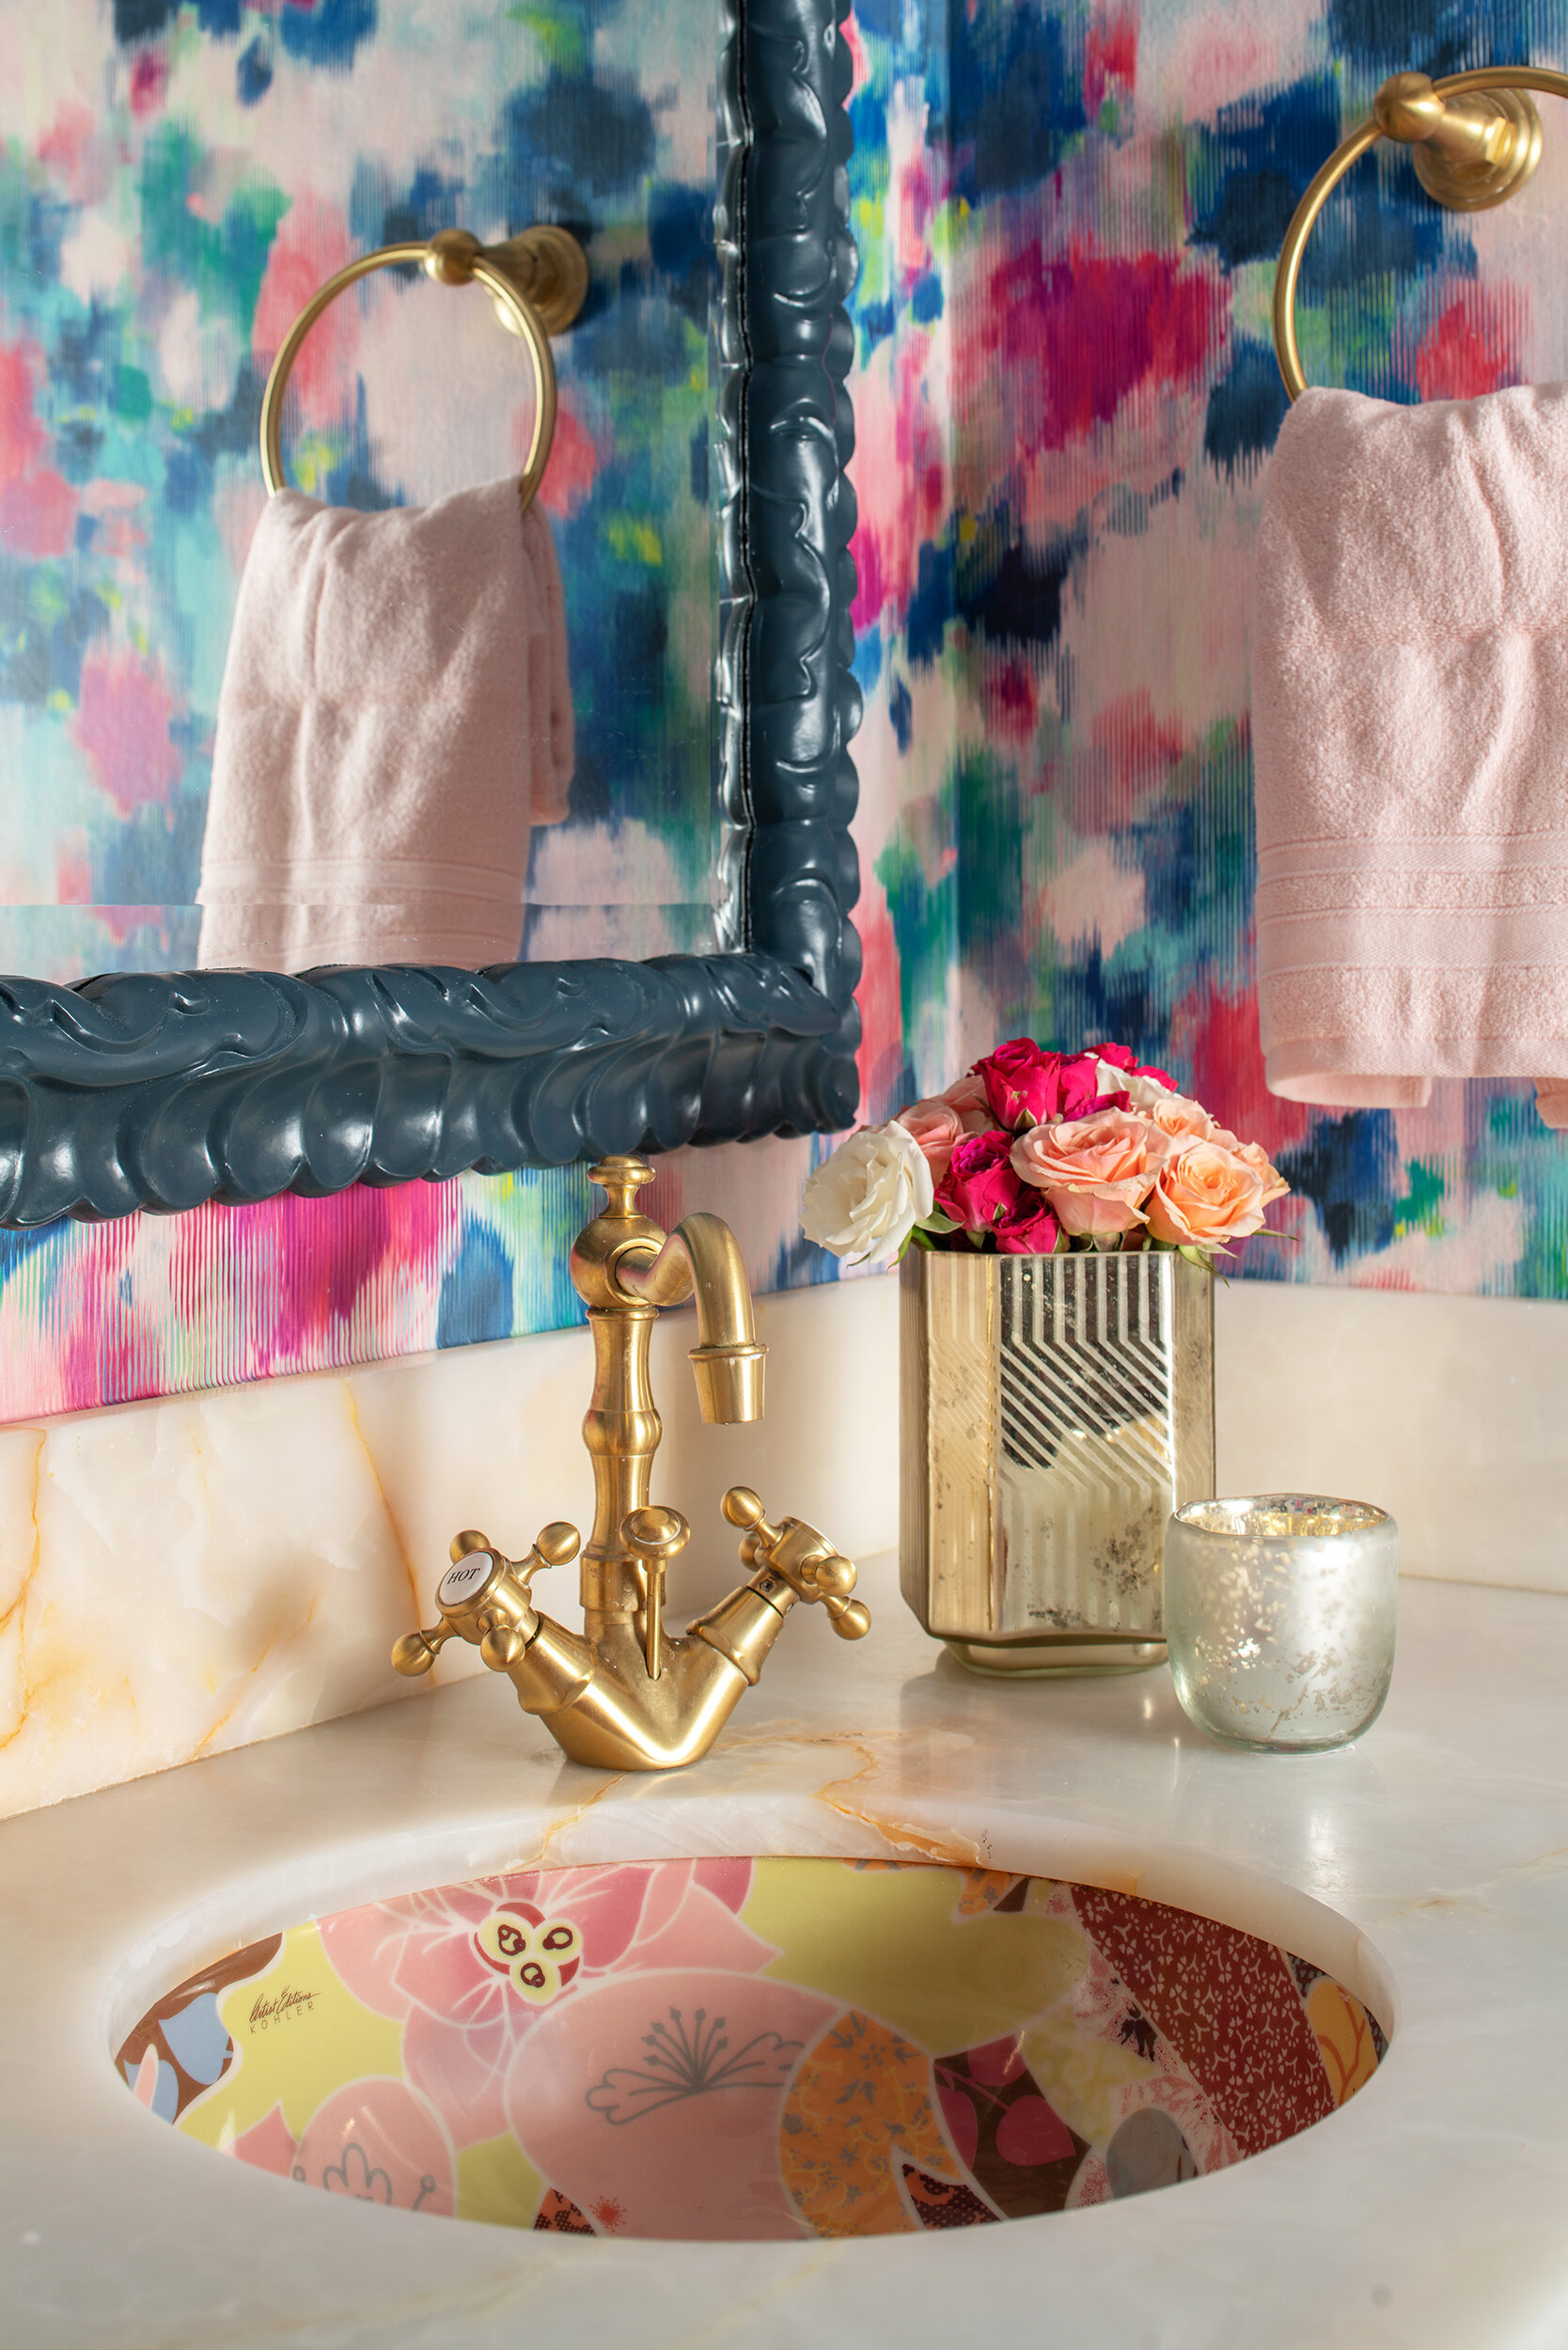 Bathroom colorful wallpaper with blue grey cabinets and gold fixtures